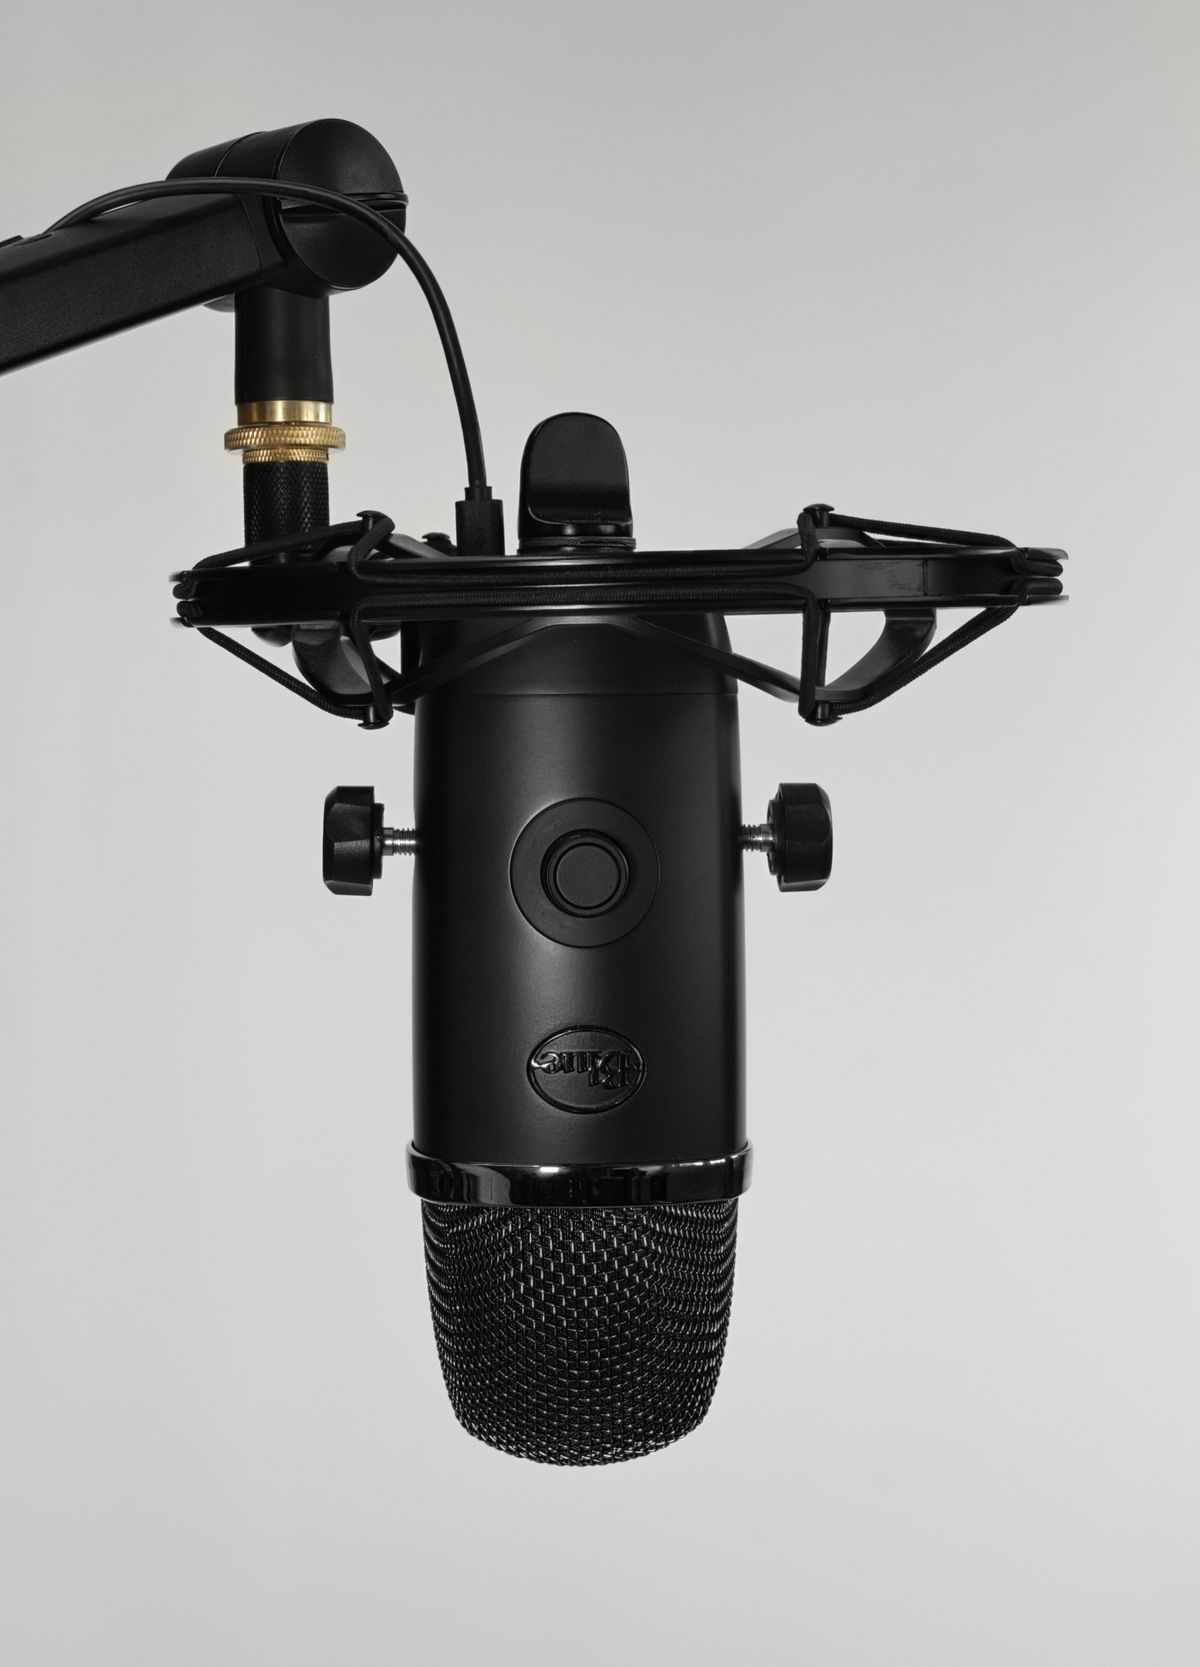 A black Yeti microphone on a boom arm with shock mount.